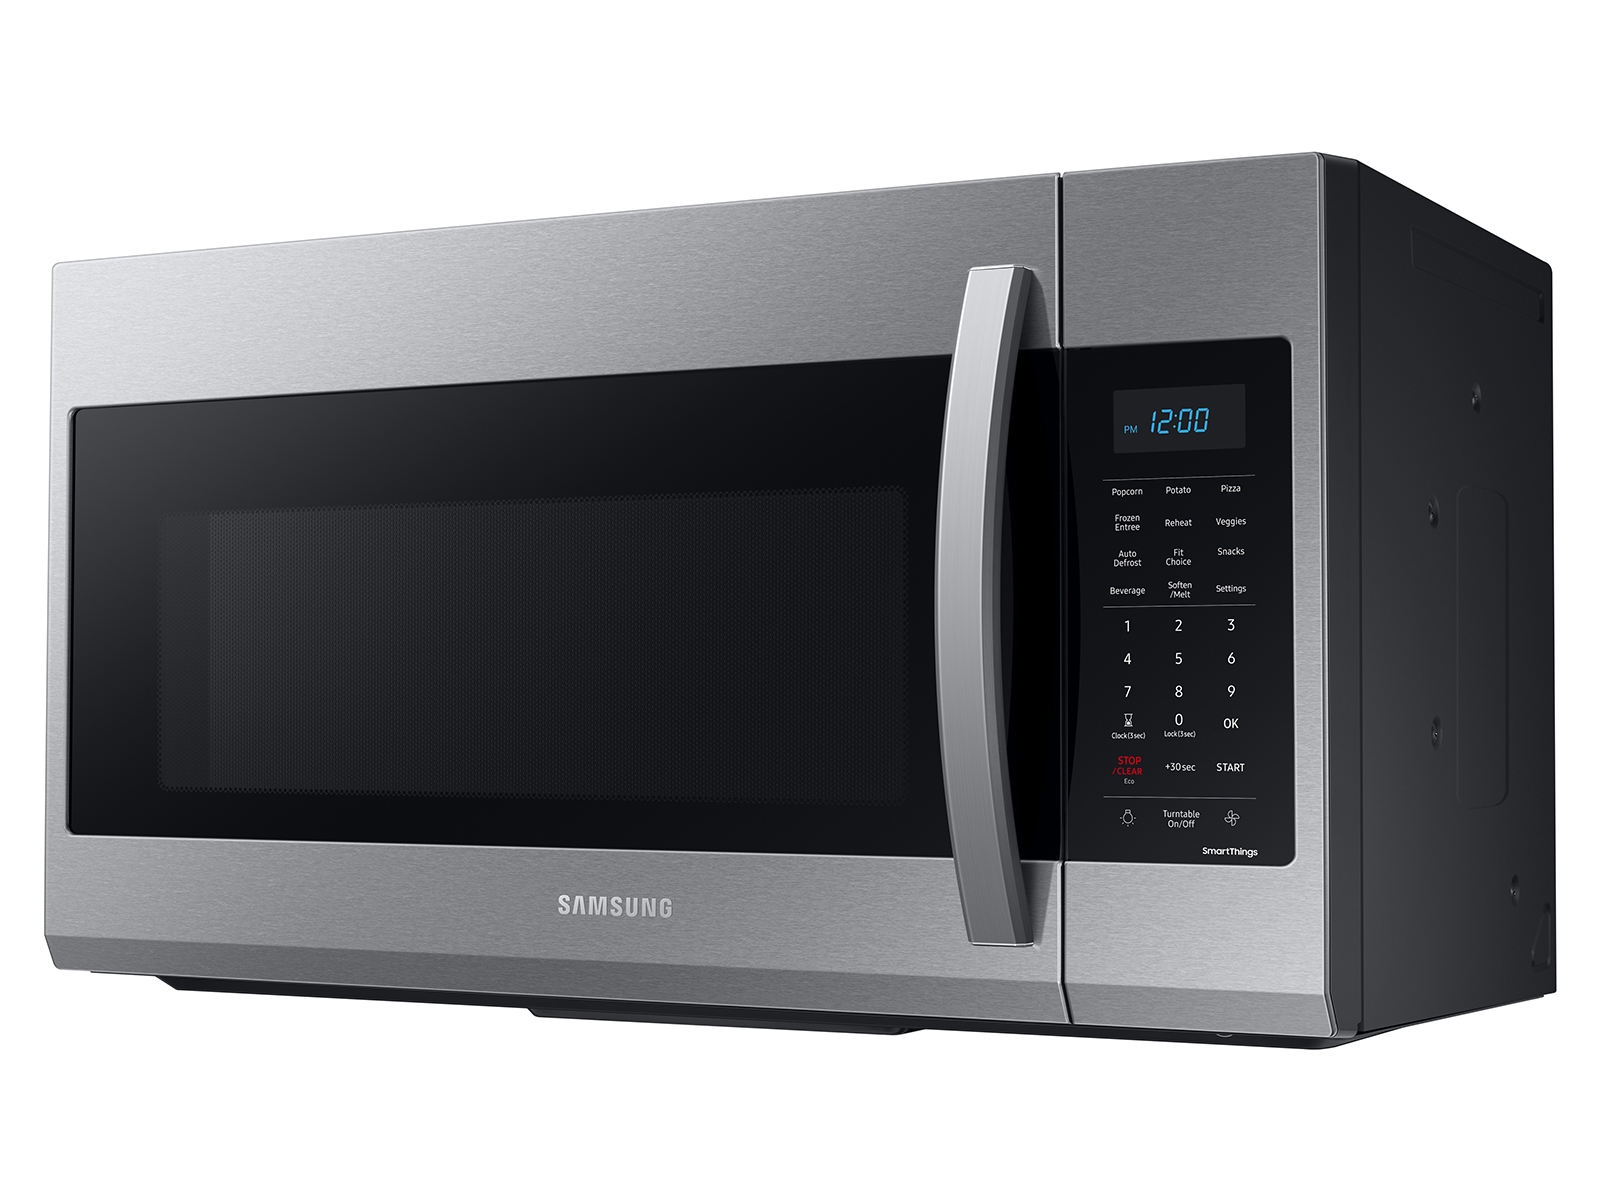 https://image-us.samsung.com/SamsungUS/home/home-appliances/microwaves/over-the-range/me19a7041ws-aa/gallery/ME19A7041WS_04_Silver_SCOM.jpg?$product-details-jpg$